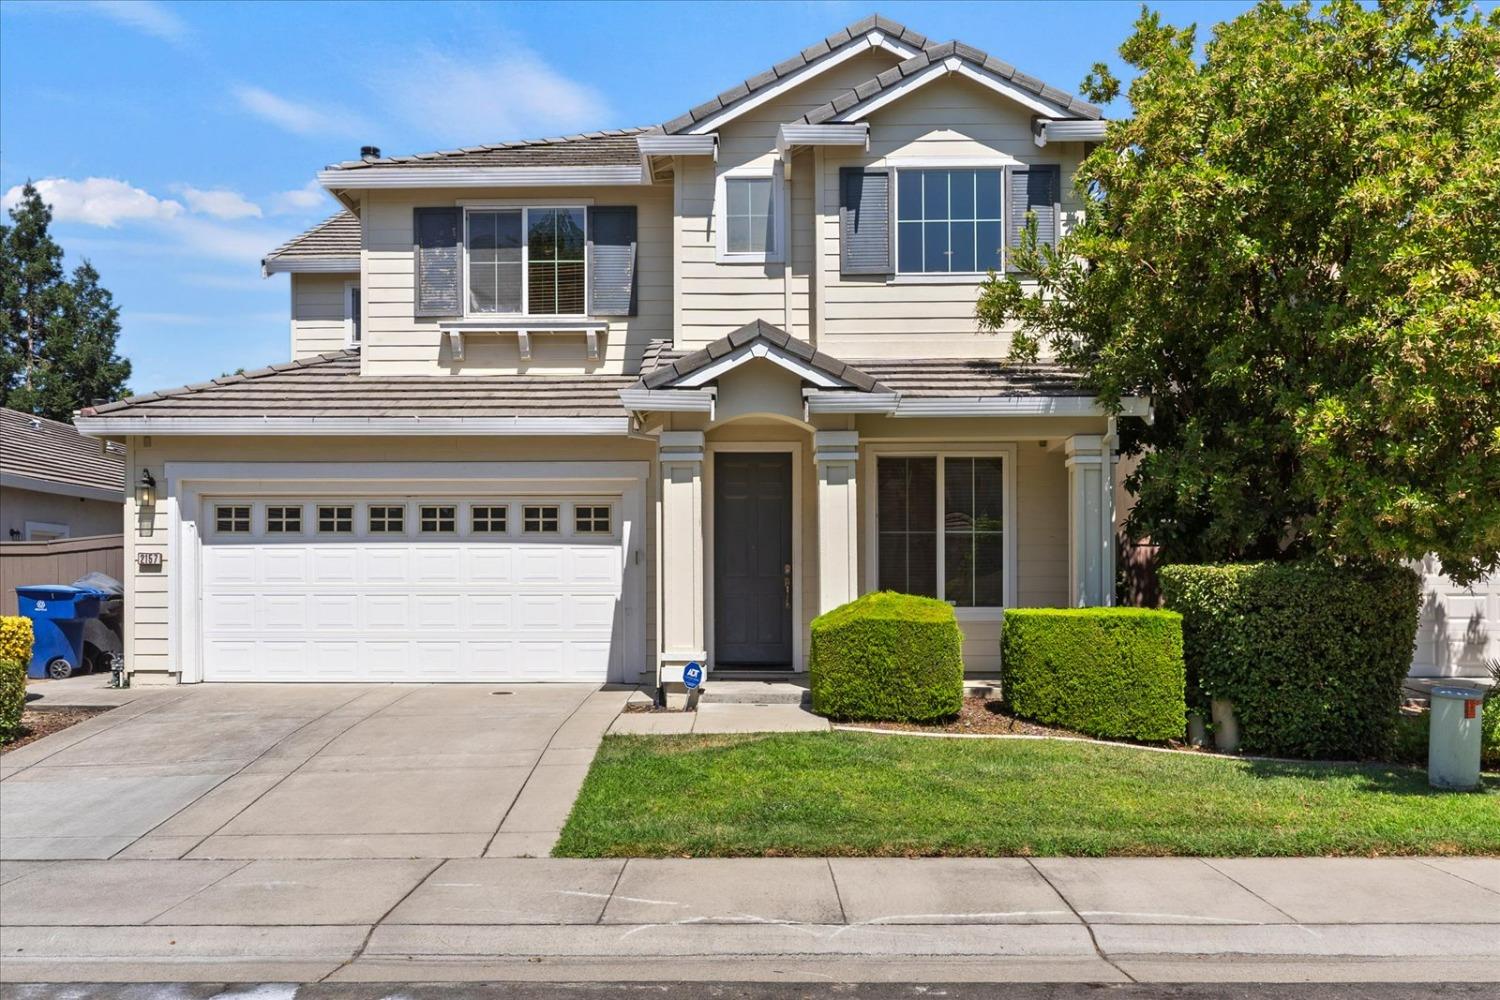 North Natomas beauty. Pride in ownership, very well maintained 5 bedroom 3 bath home. Fresh paint, n